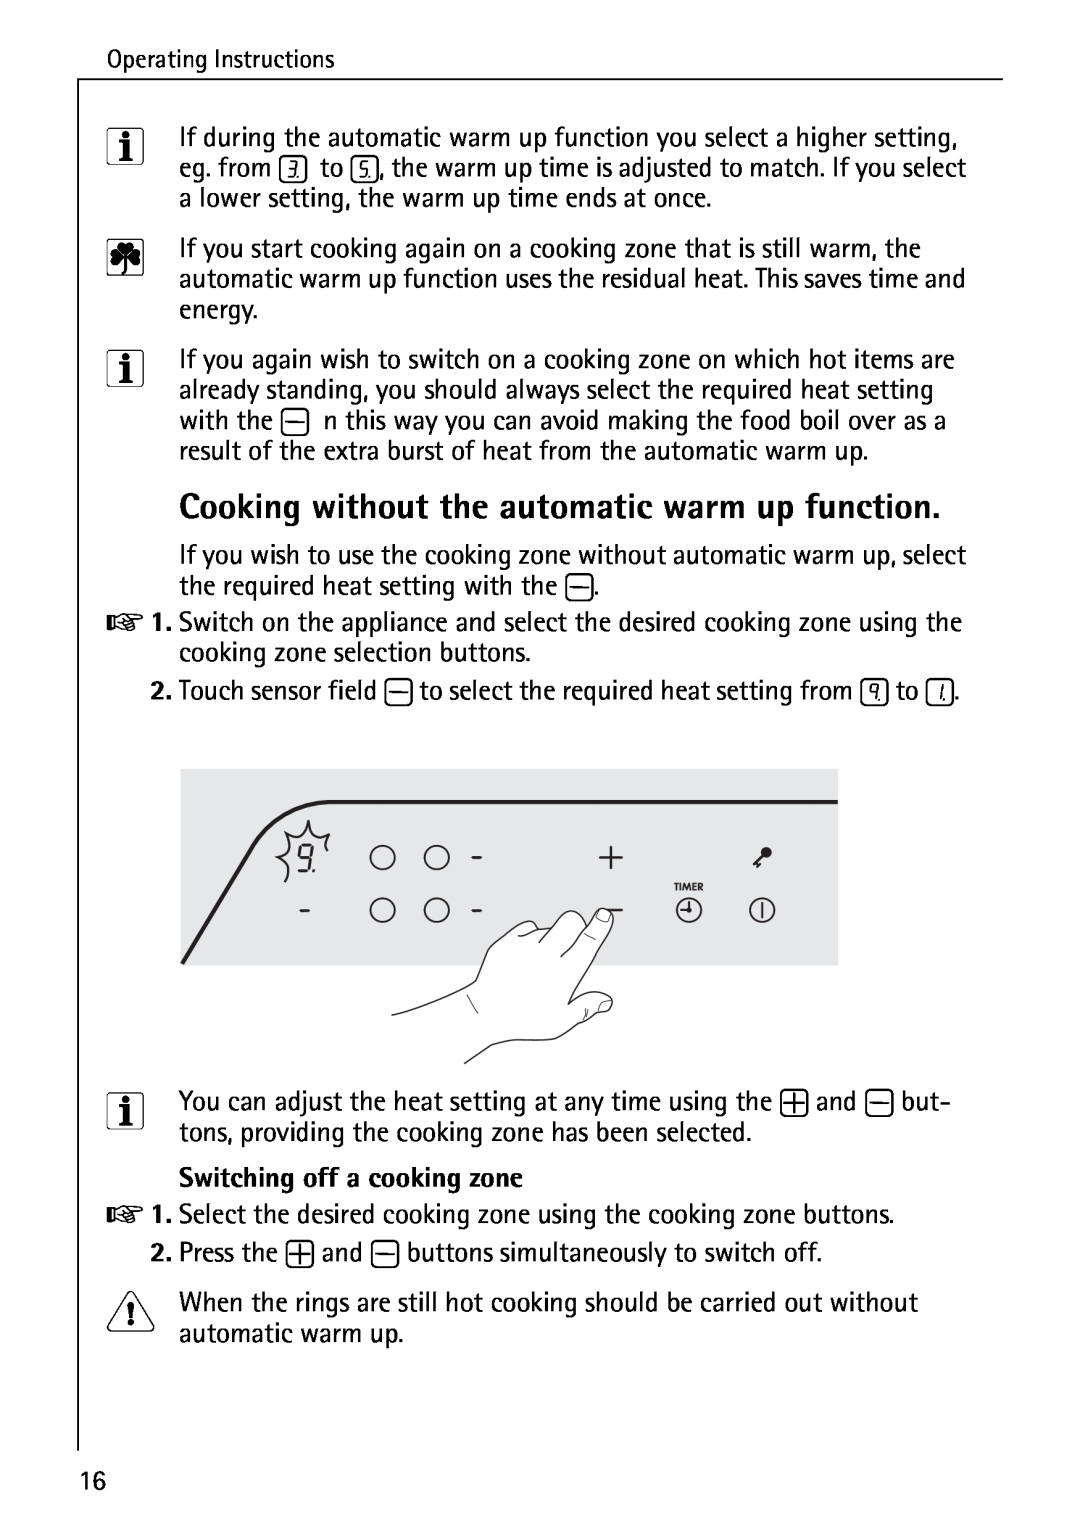 Electrolux C65030K operating instructions Cooking without the automatic warm up function, Switching off a cooking zone 